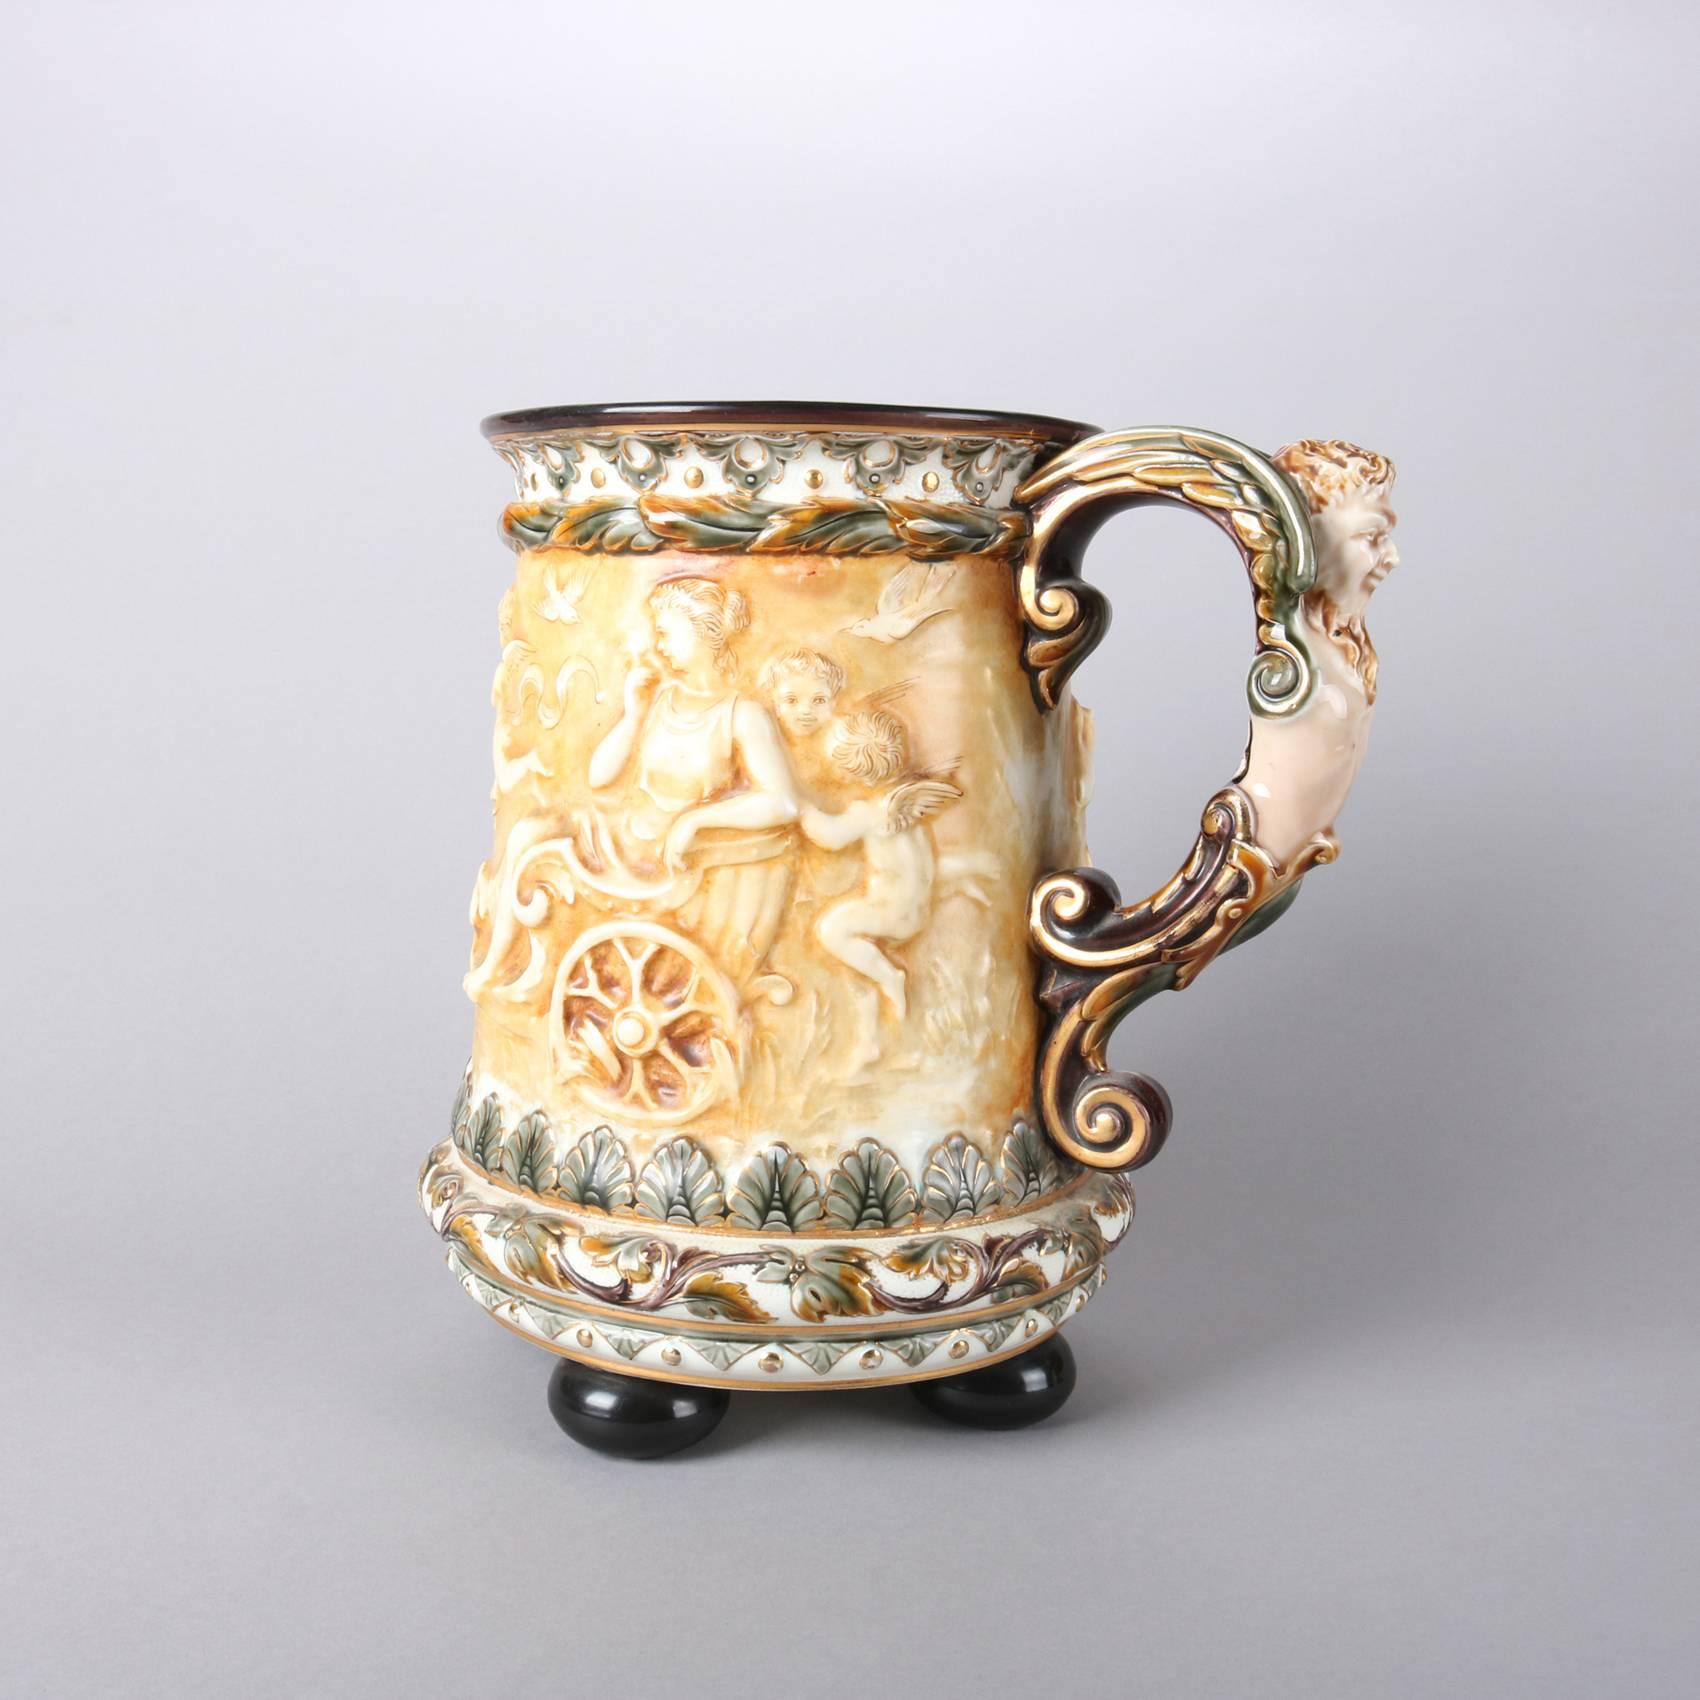 Oversized Swedish antique art pottery mug by Rorstrand features high relief Classical scene including cherubs and chariots, figural mask handle, and seated on ball feet, crown Rorstrand maker mark stamped on base with "Made in Sweden",